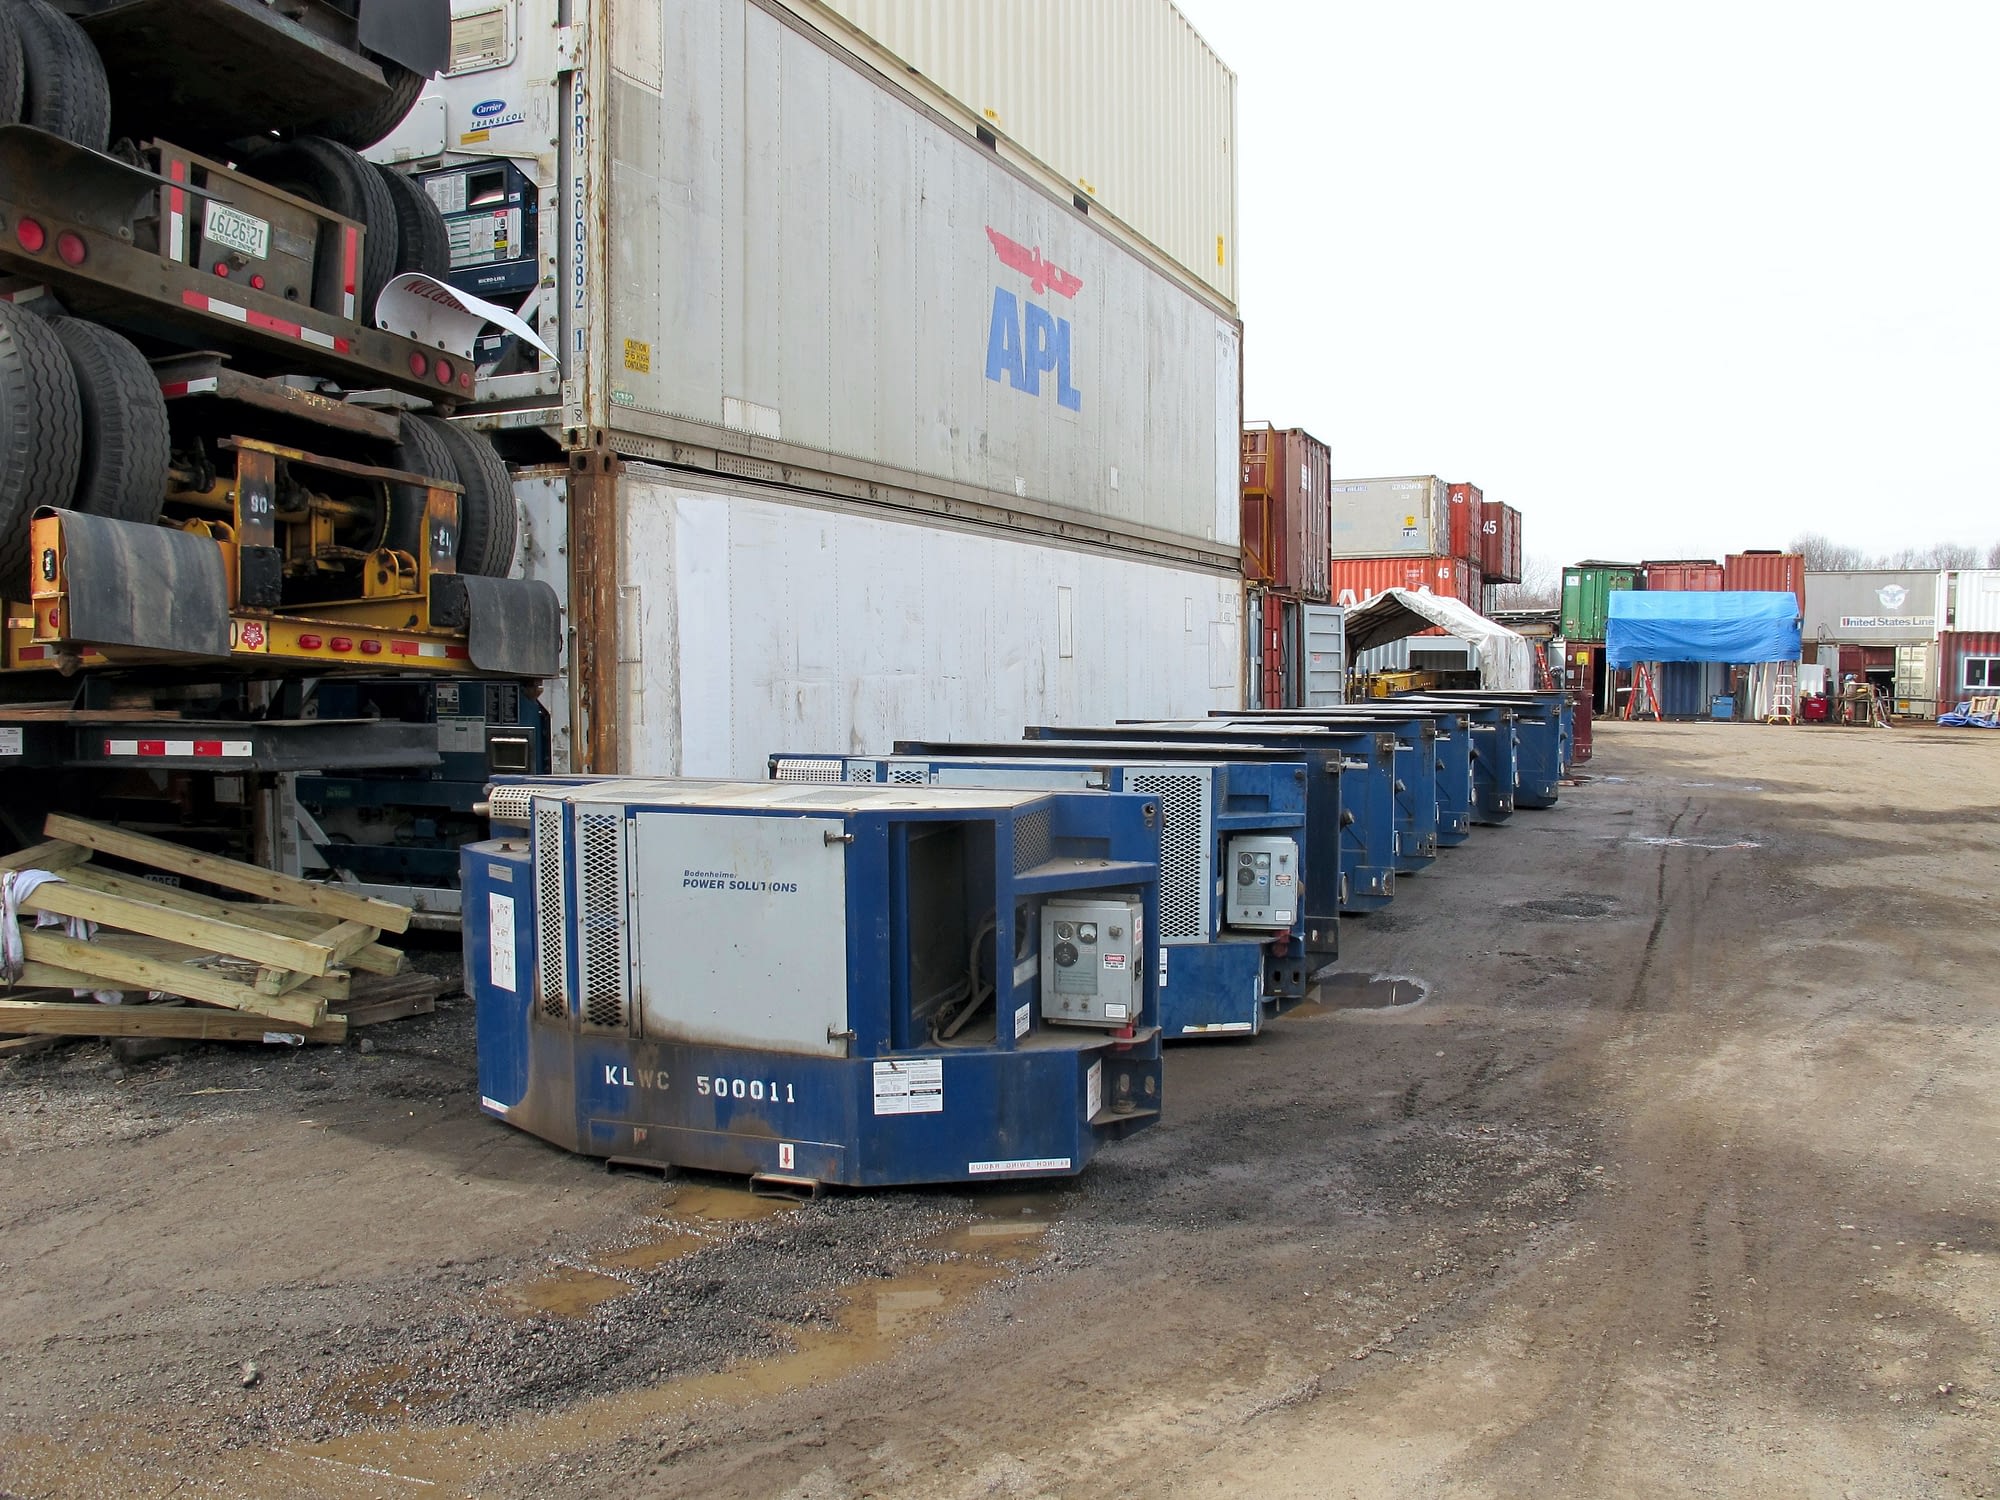 TRS Containers NJ sells and rents used diesel gensets to power running refrigeration containers